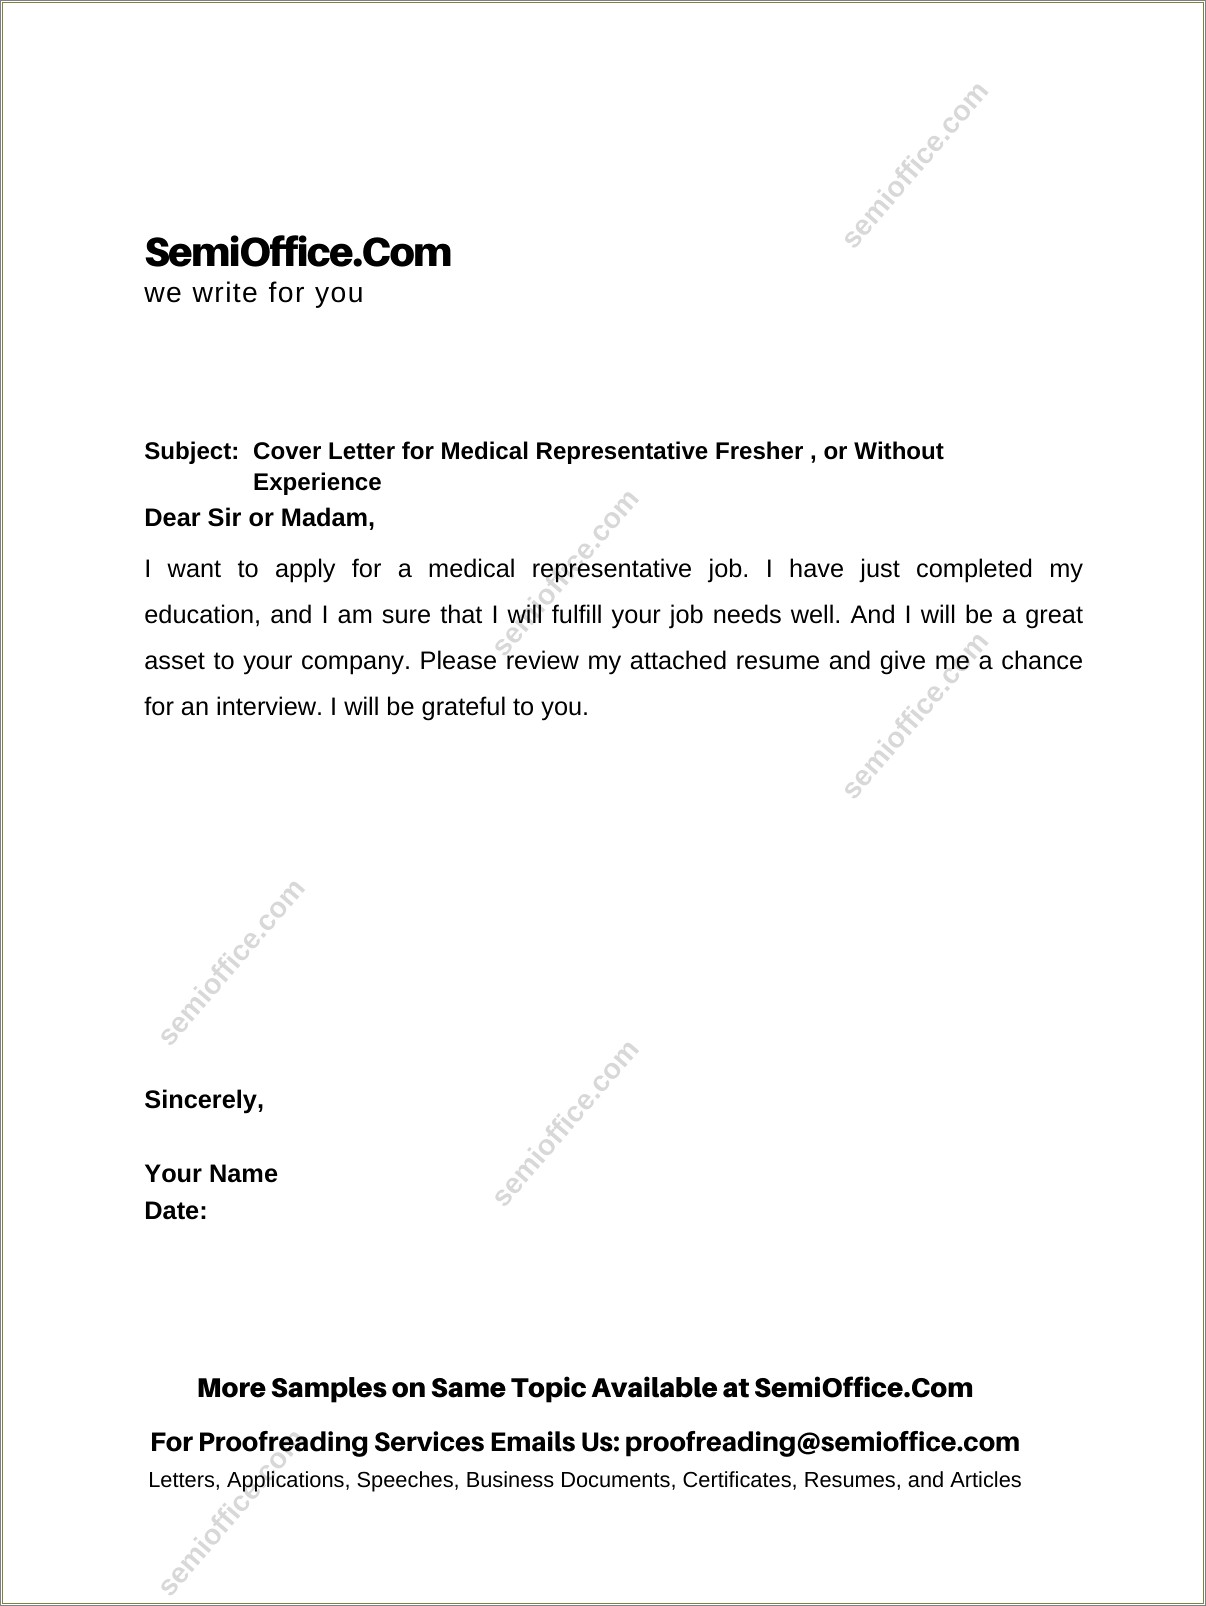 Content Of A Resume Cover Letter Medical